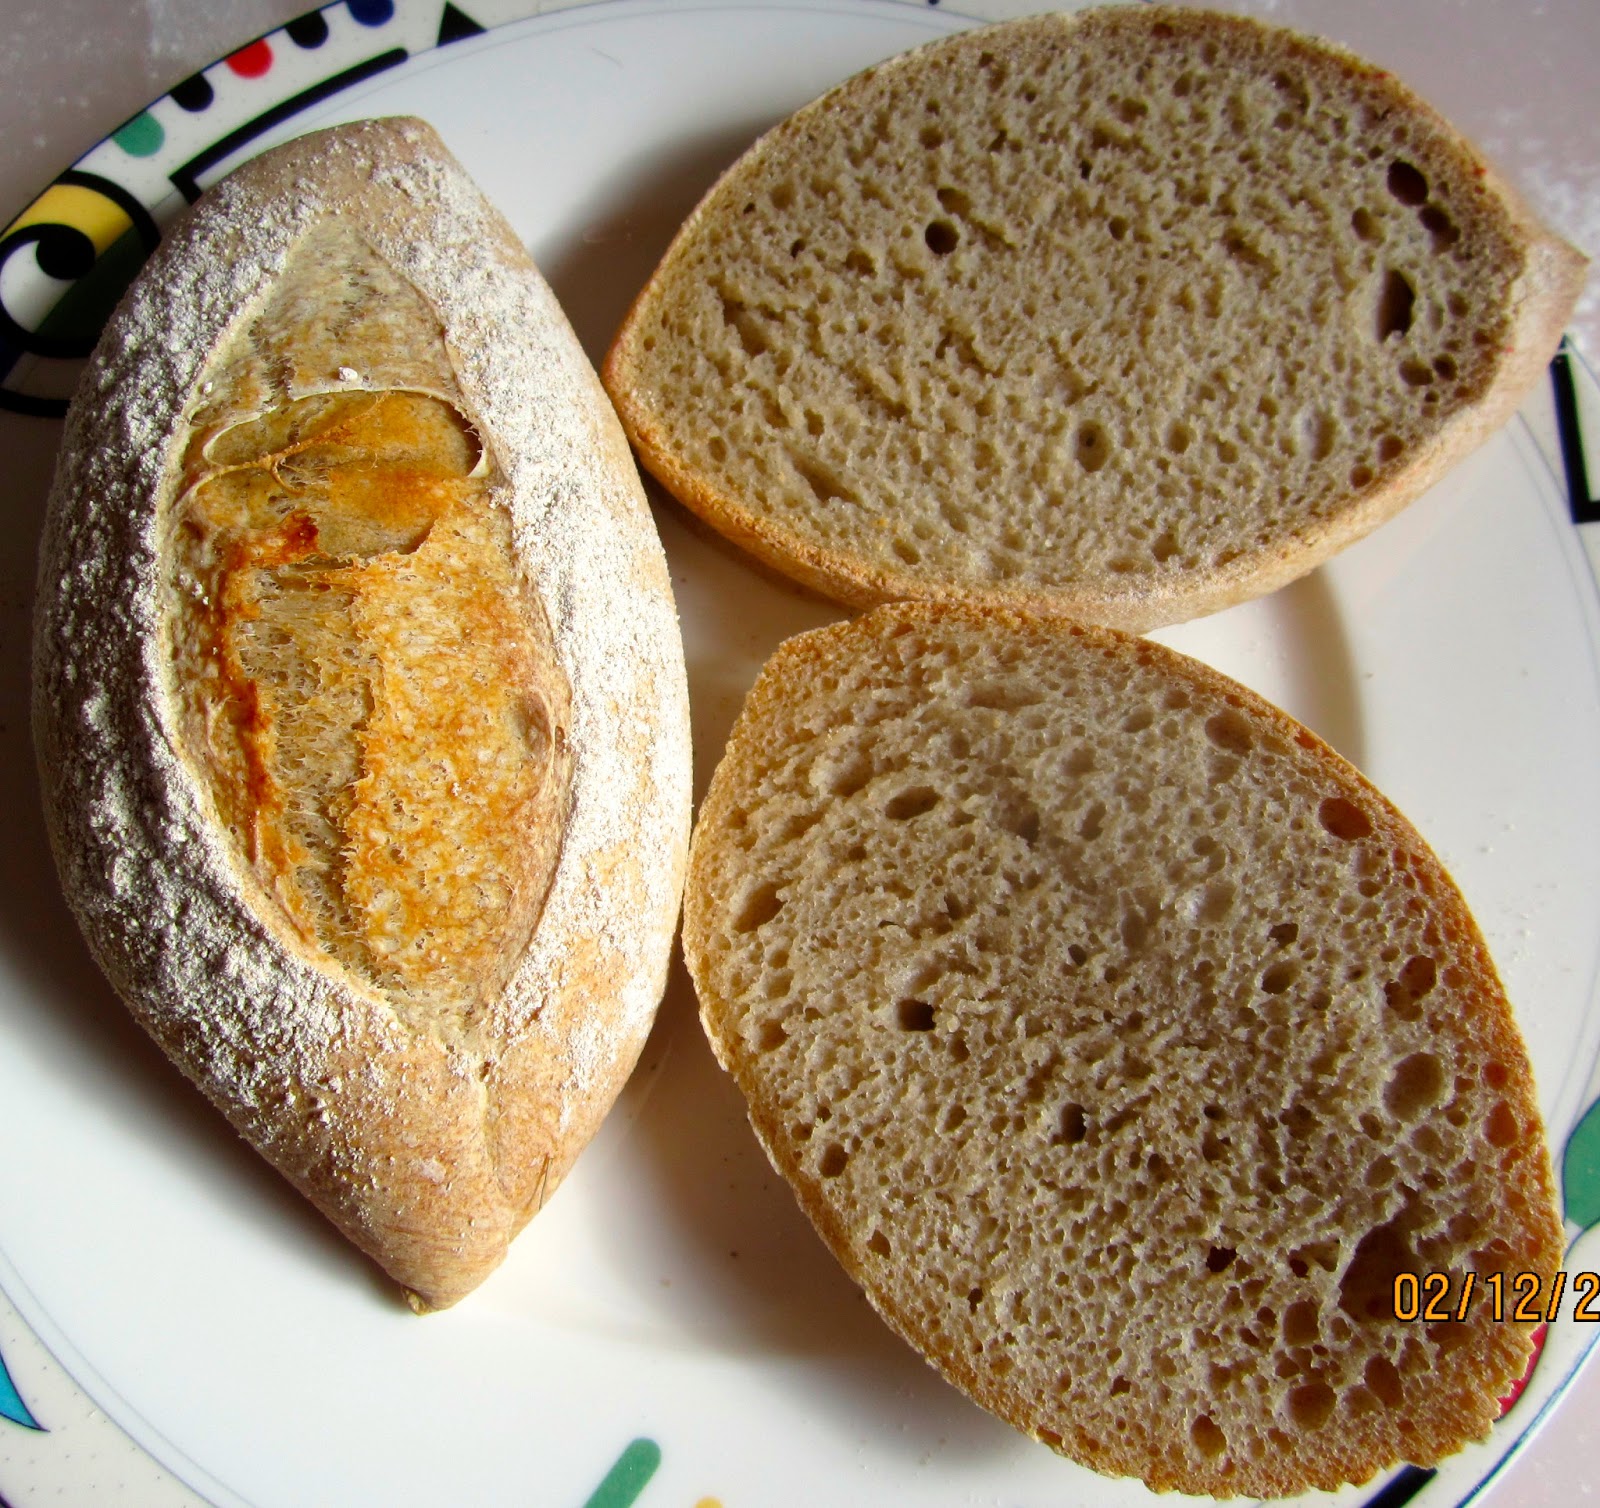 Brot &amp; Bread: BAUERNBRÖTCHEN - RUSTIC ROLLS WITH OLD DOUGH